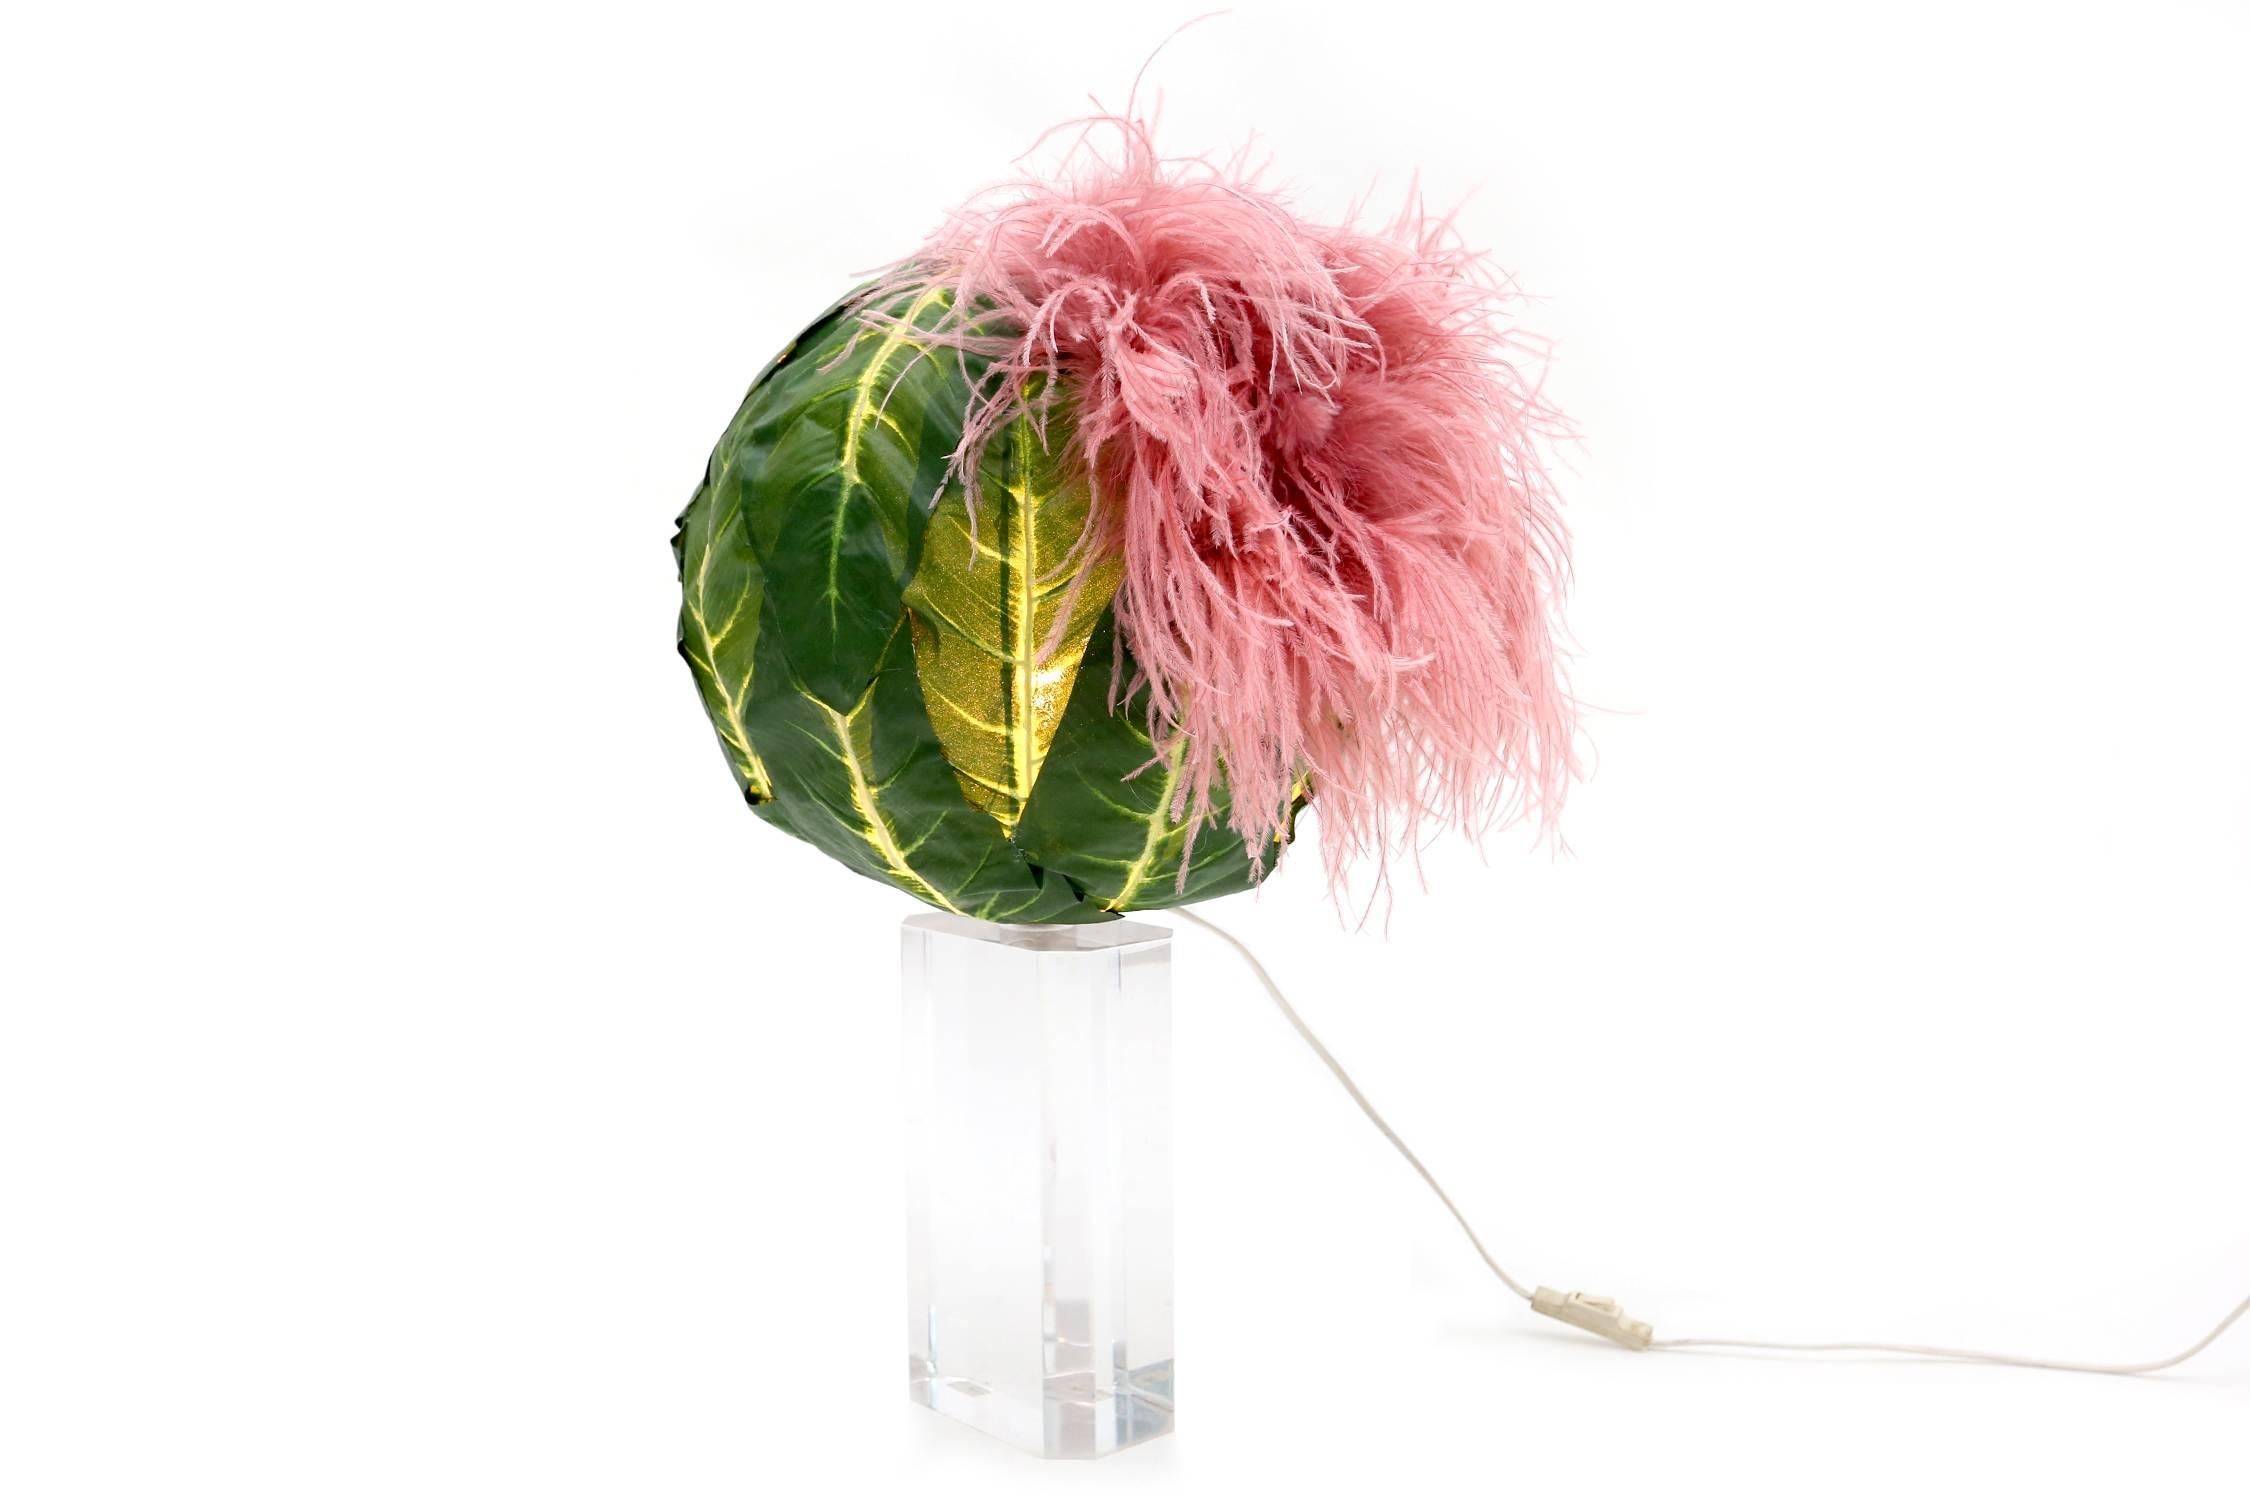 Lucite post-modern table lamp, Italy, 1970s
A Custom designed shade of faux leaves and ostrich feathers make this lamp very fitting to the ugly cool design trend.
Post-Modern circa 1970s
Measures: H 60 Ø 36 cm.
Would fit well in a contemporary